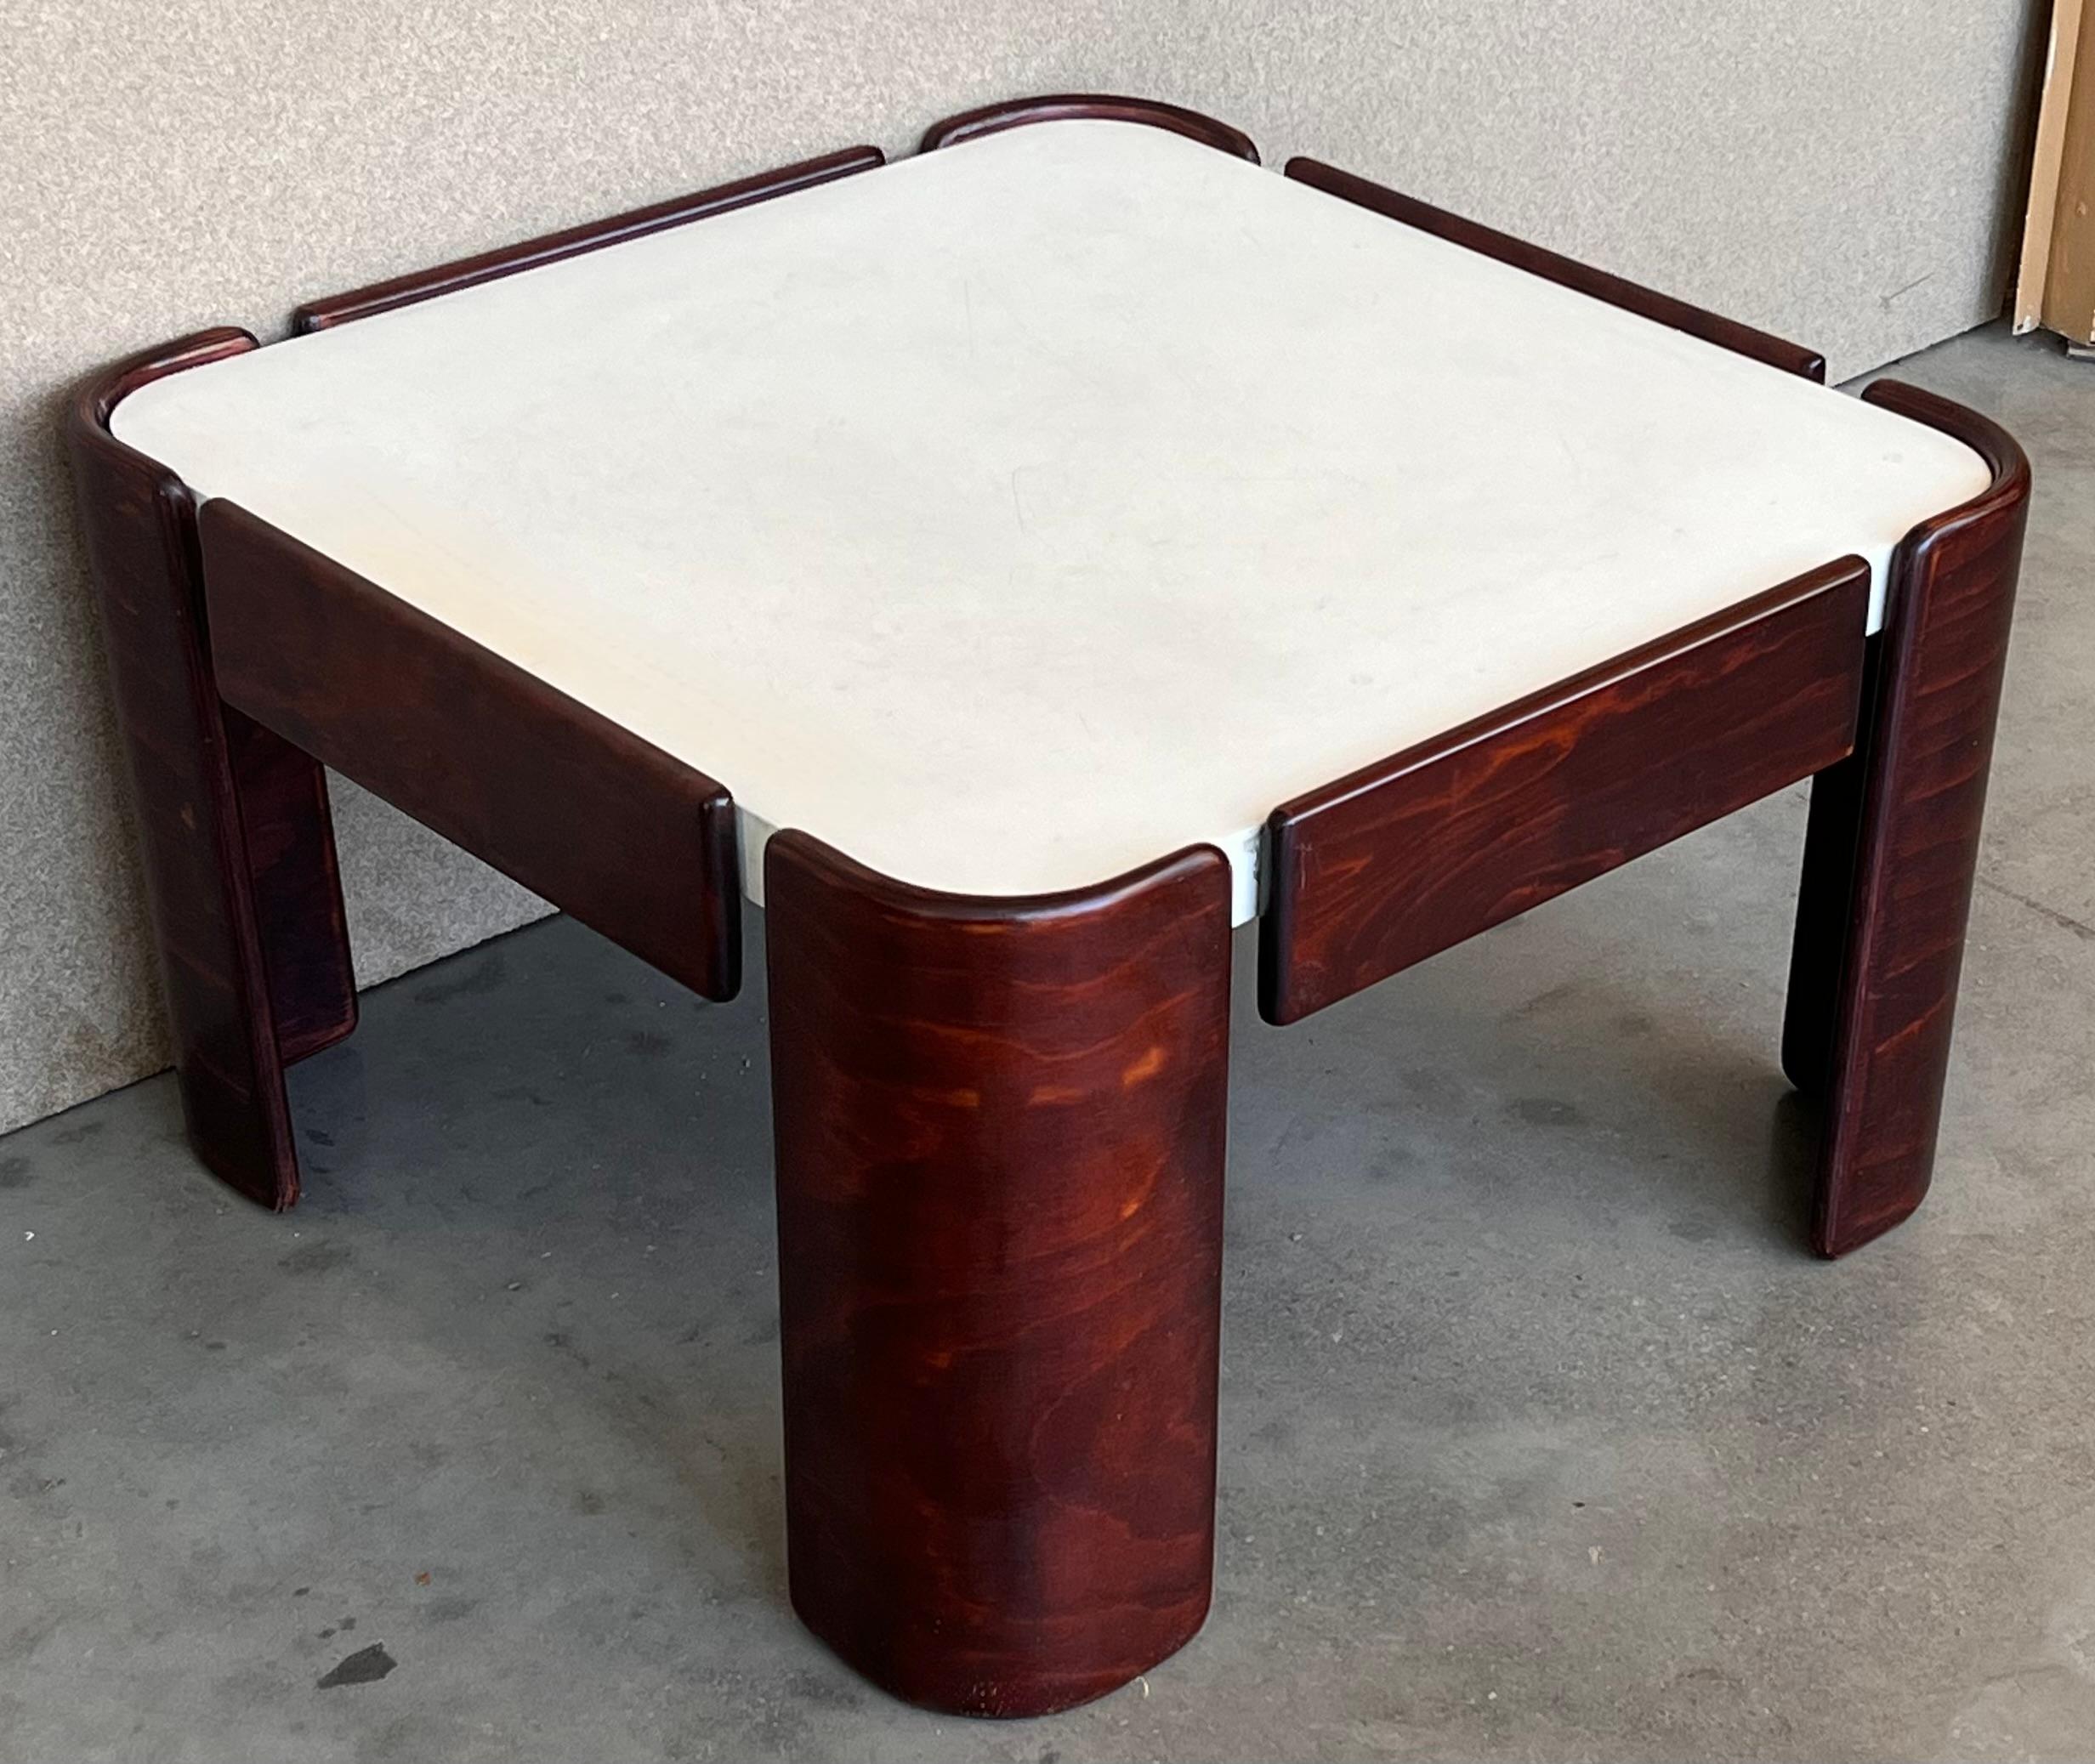 Spanish Mid-Century Modern Square Table with Curved Legs and White Top For Sale